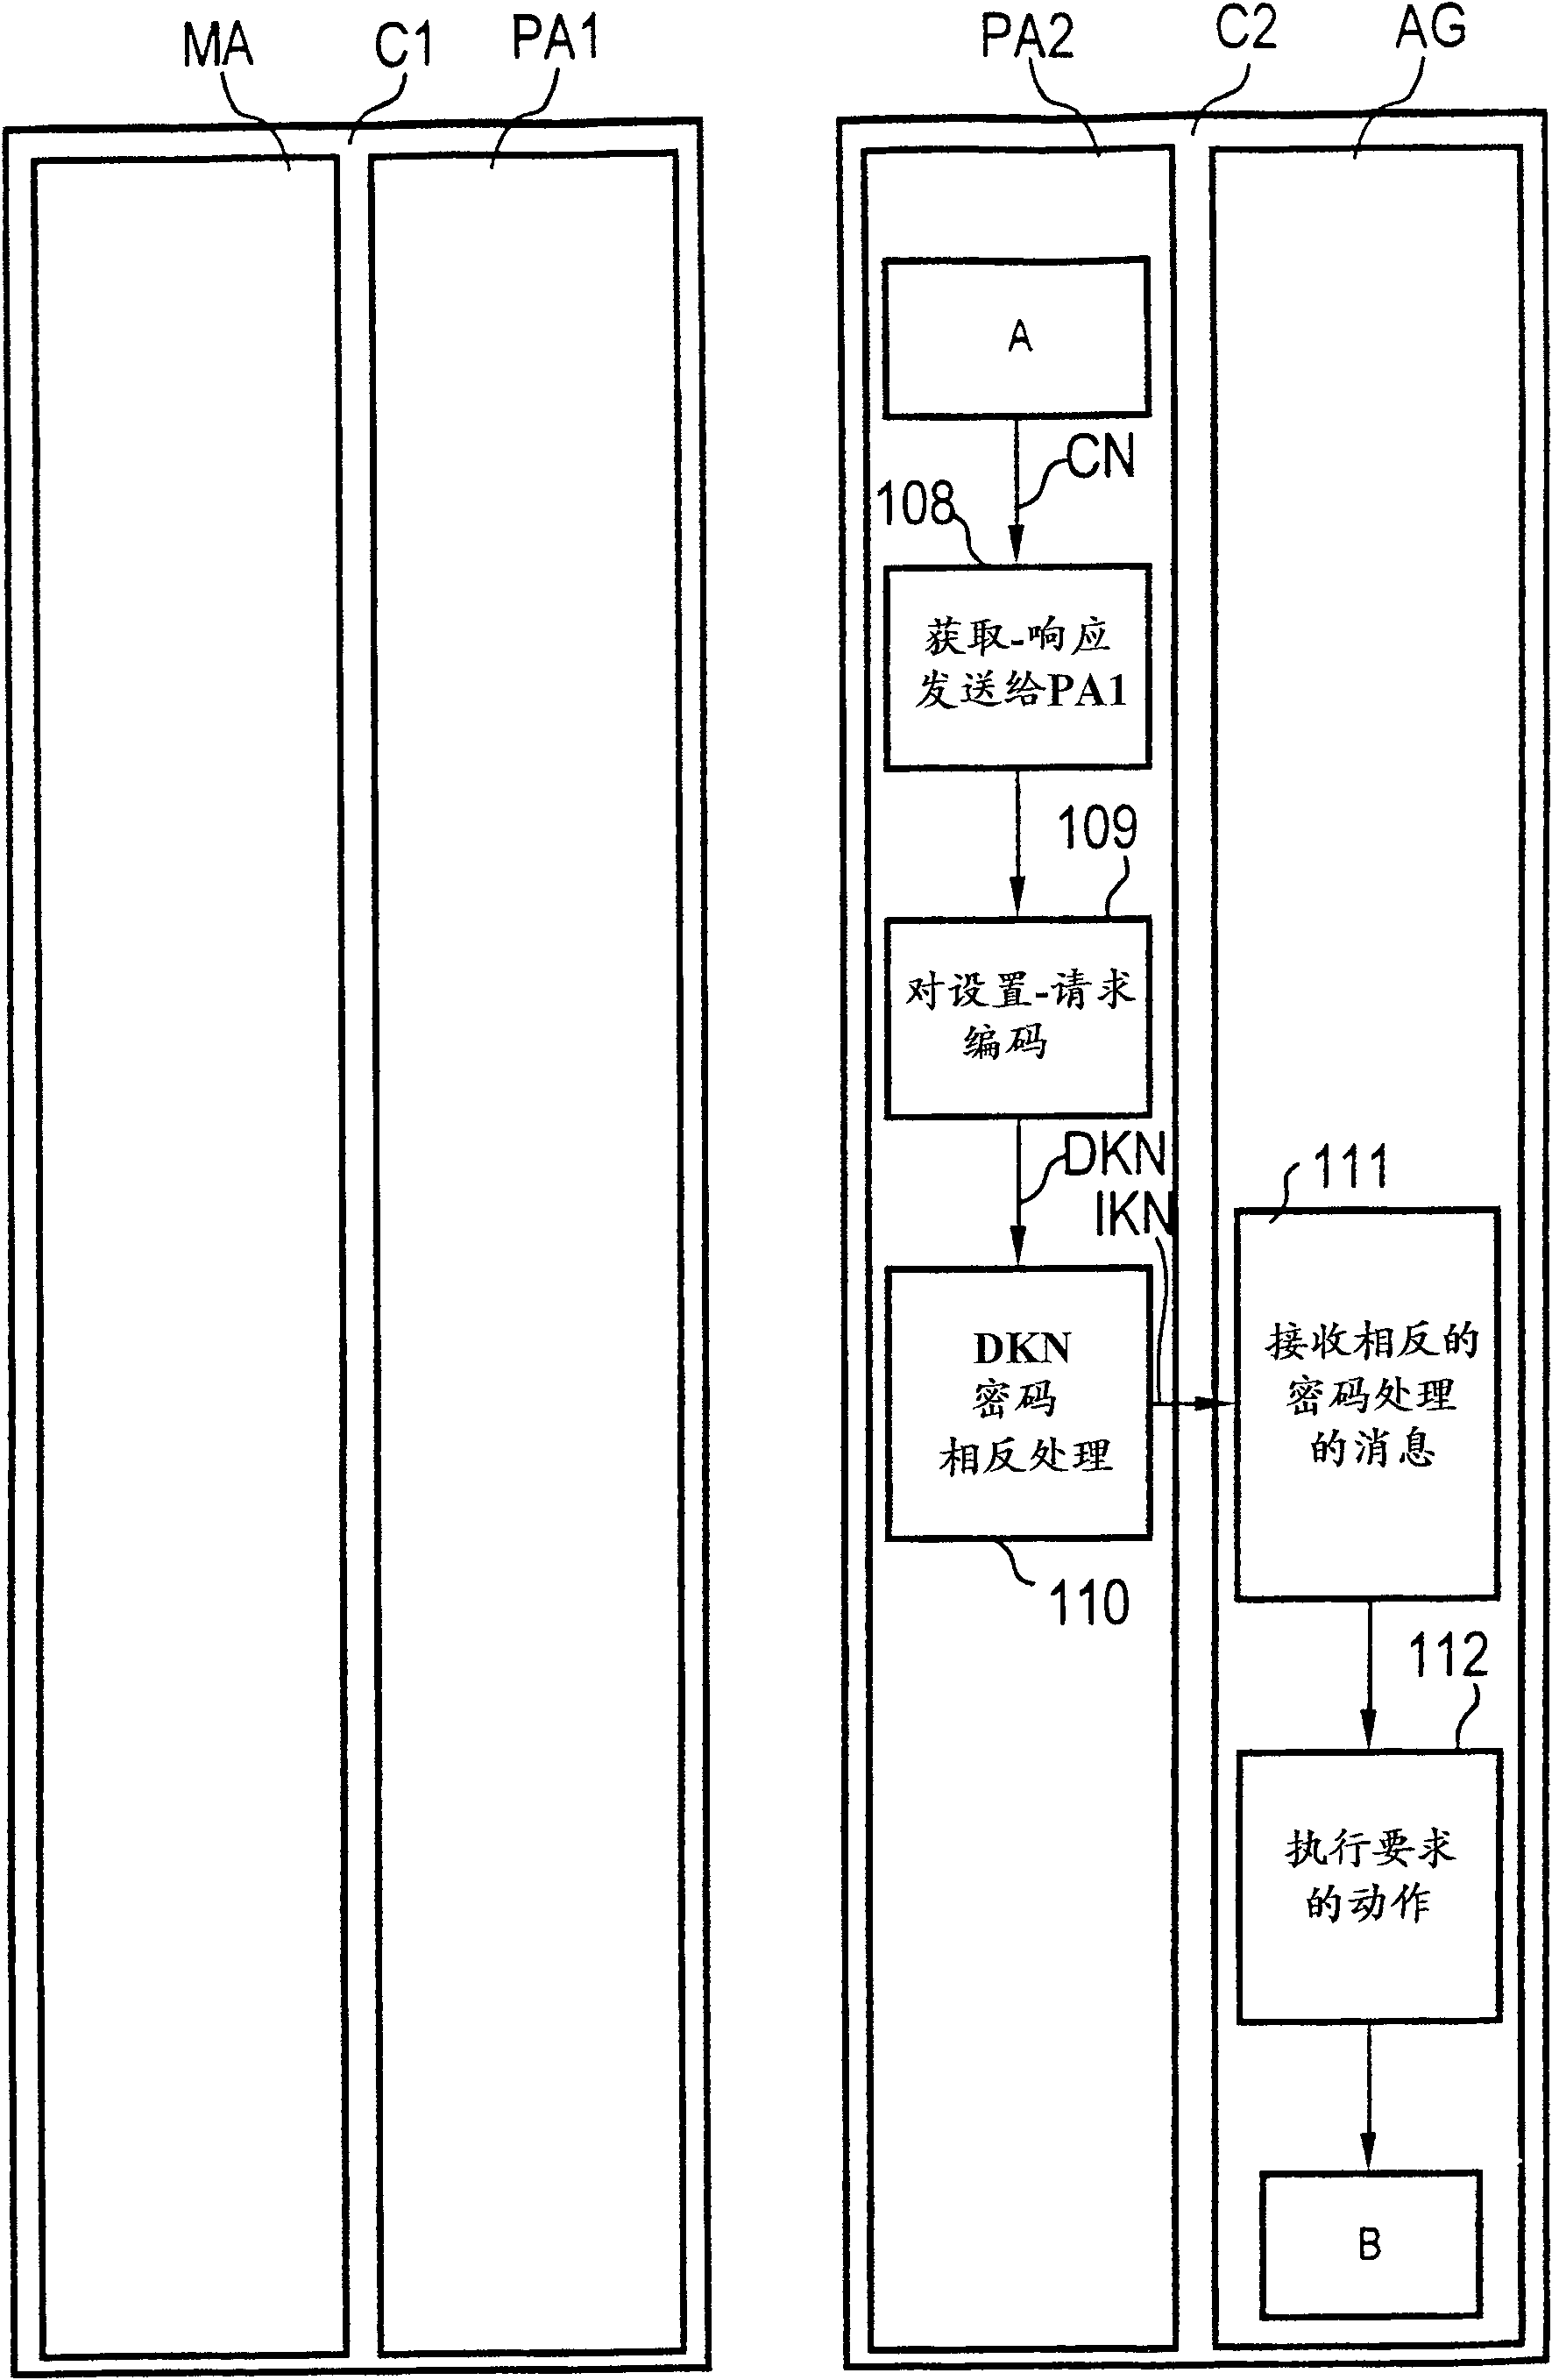 Method and computer system for coding a message